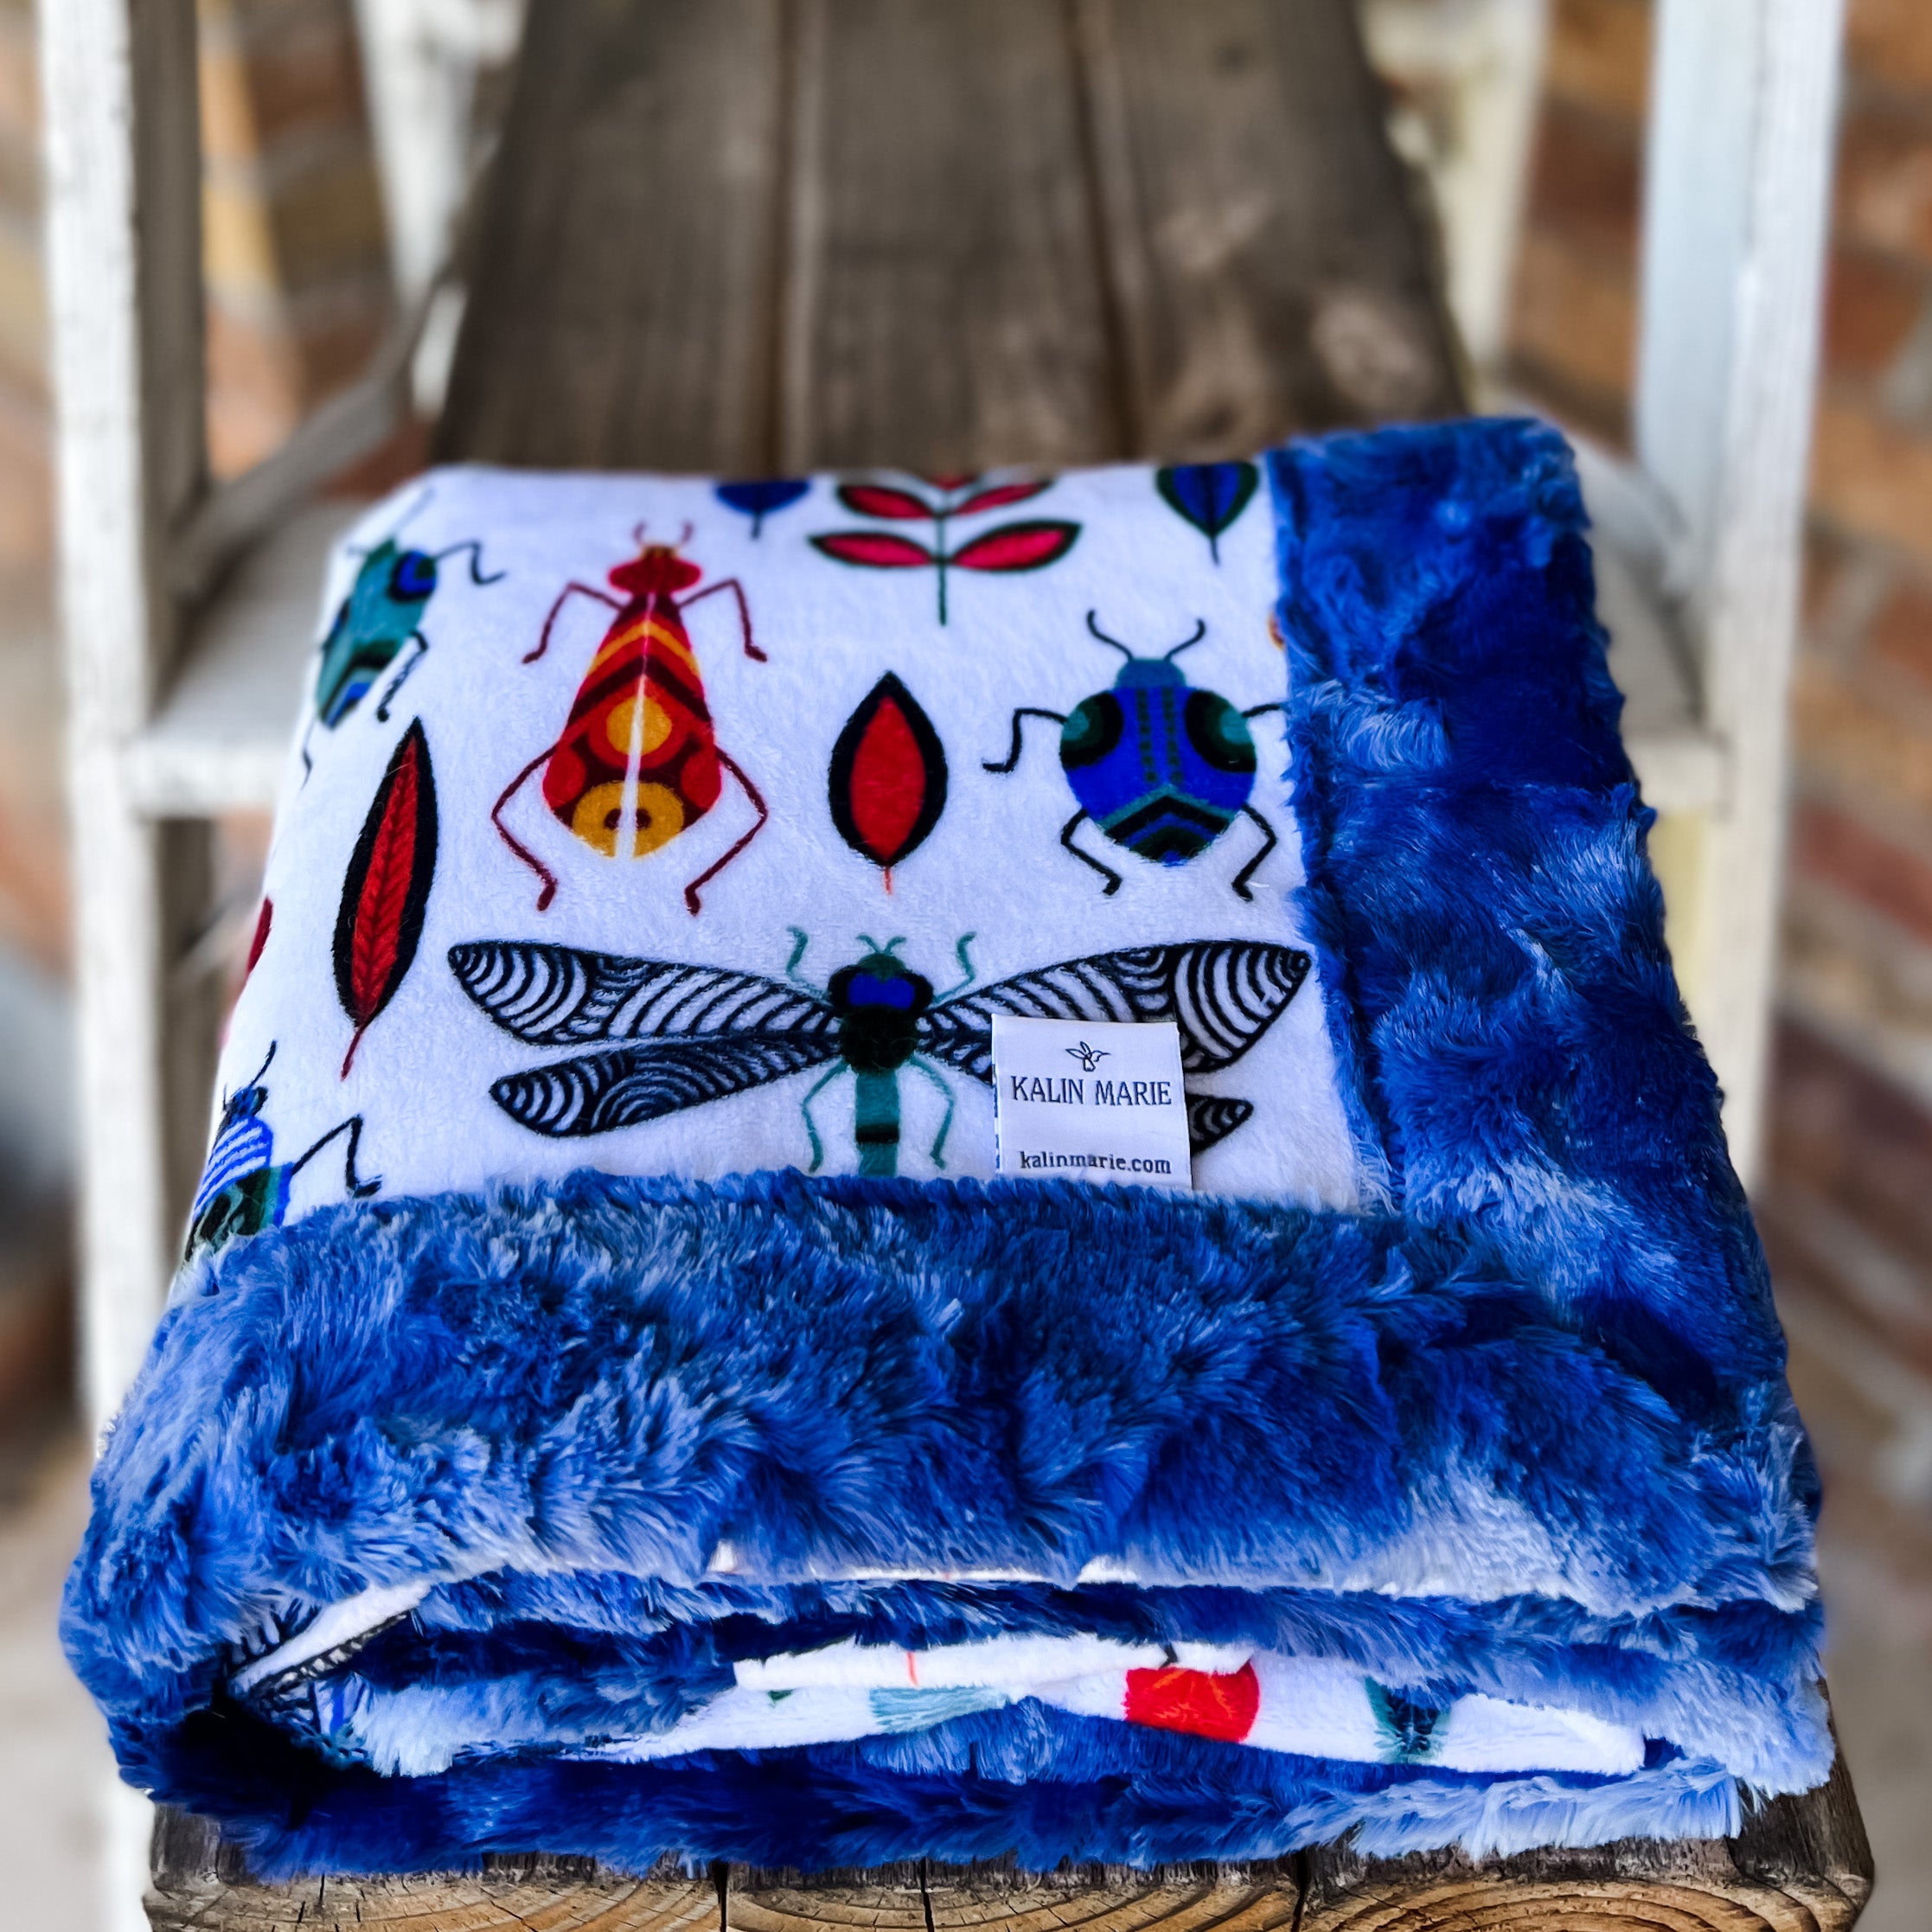 Last Chance! New Buggy Snuggle Blanket